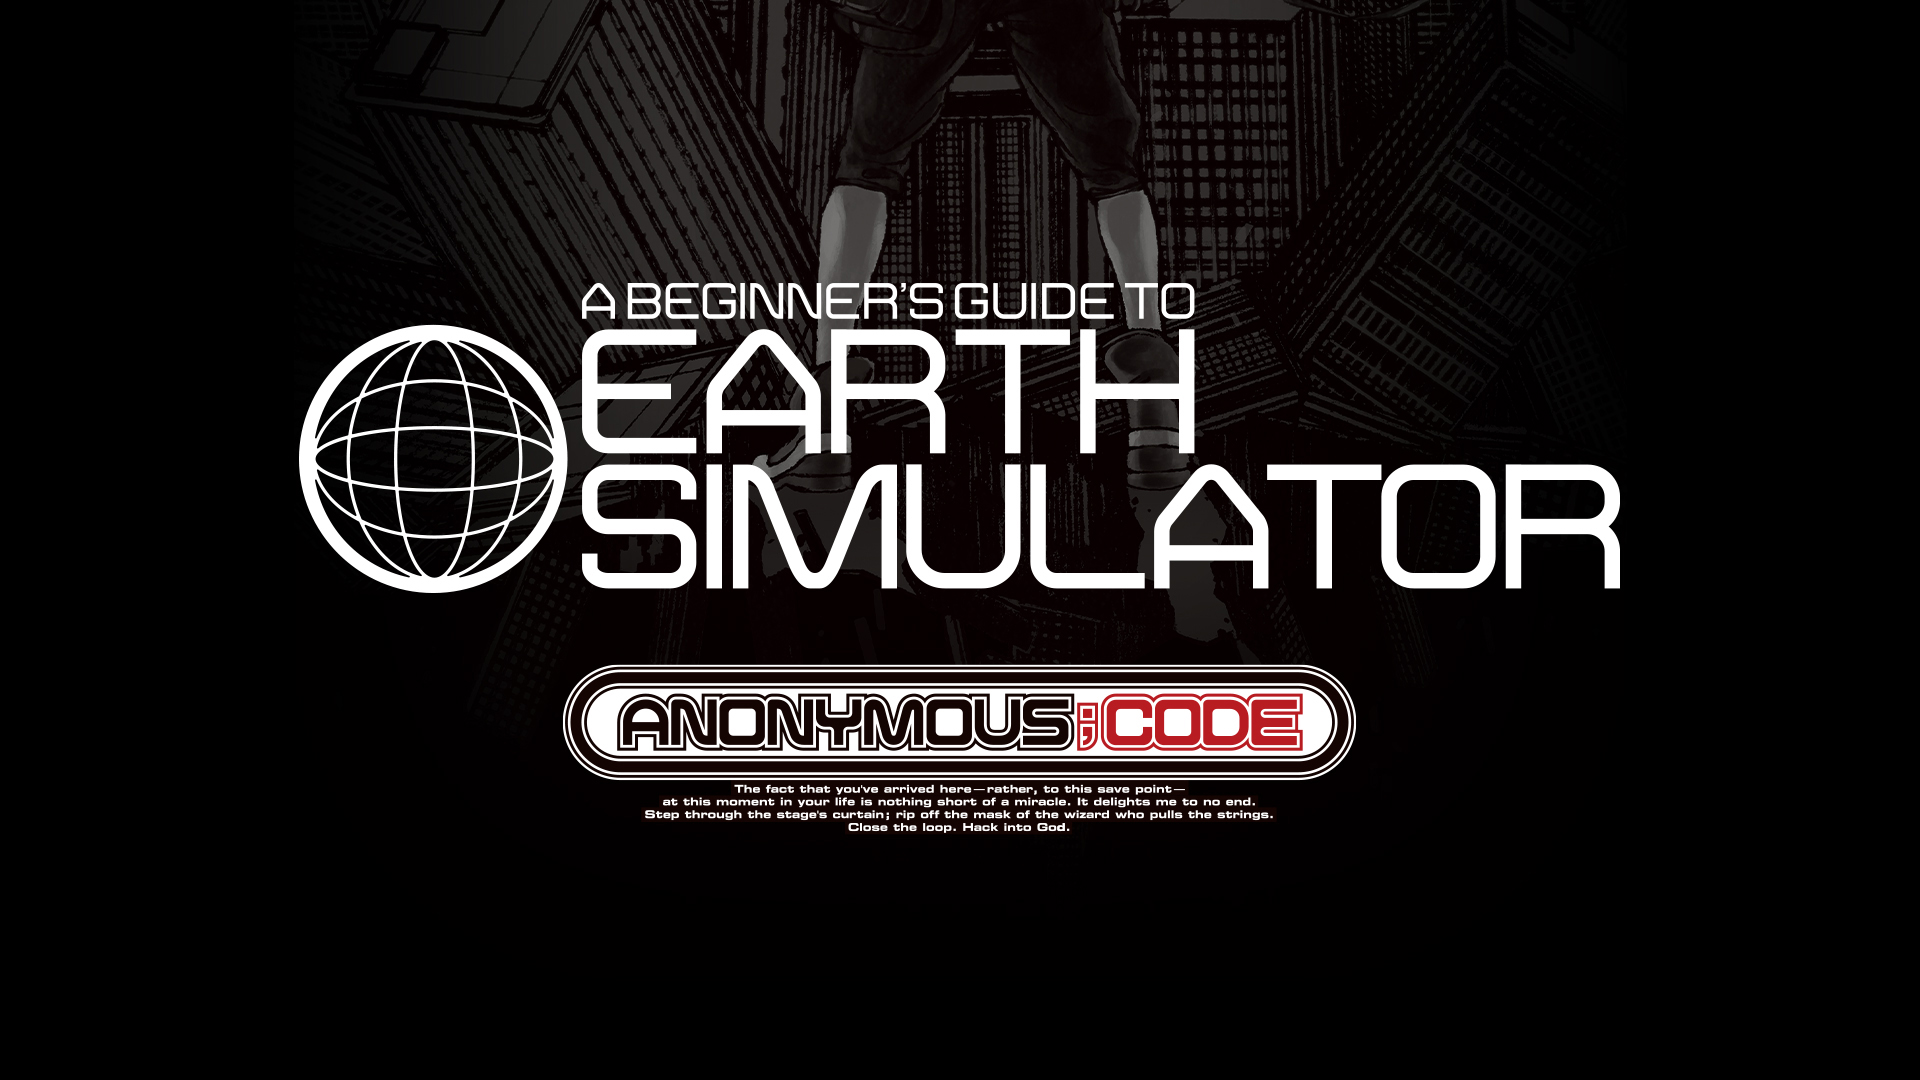 A BEGINNER'S GUIDE TO EARTH SIMULATOR